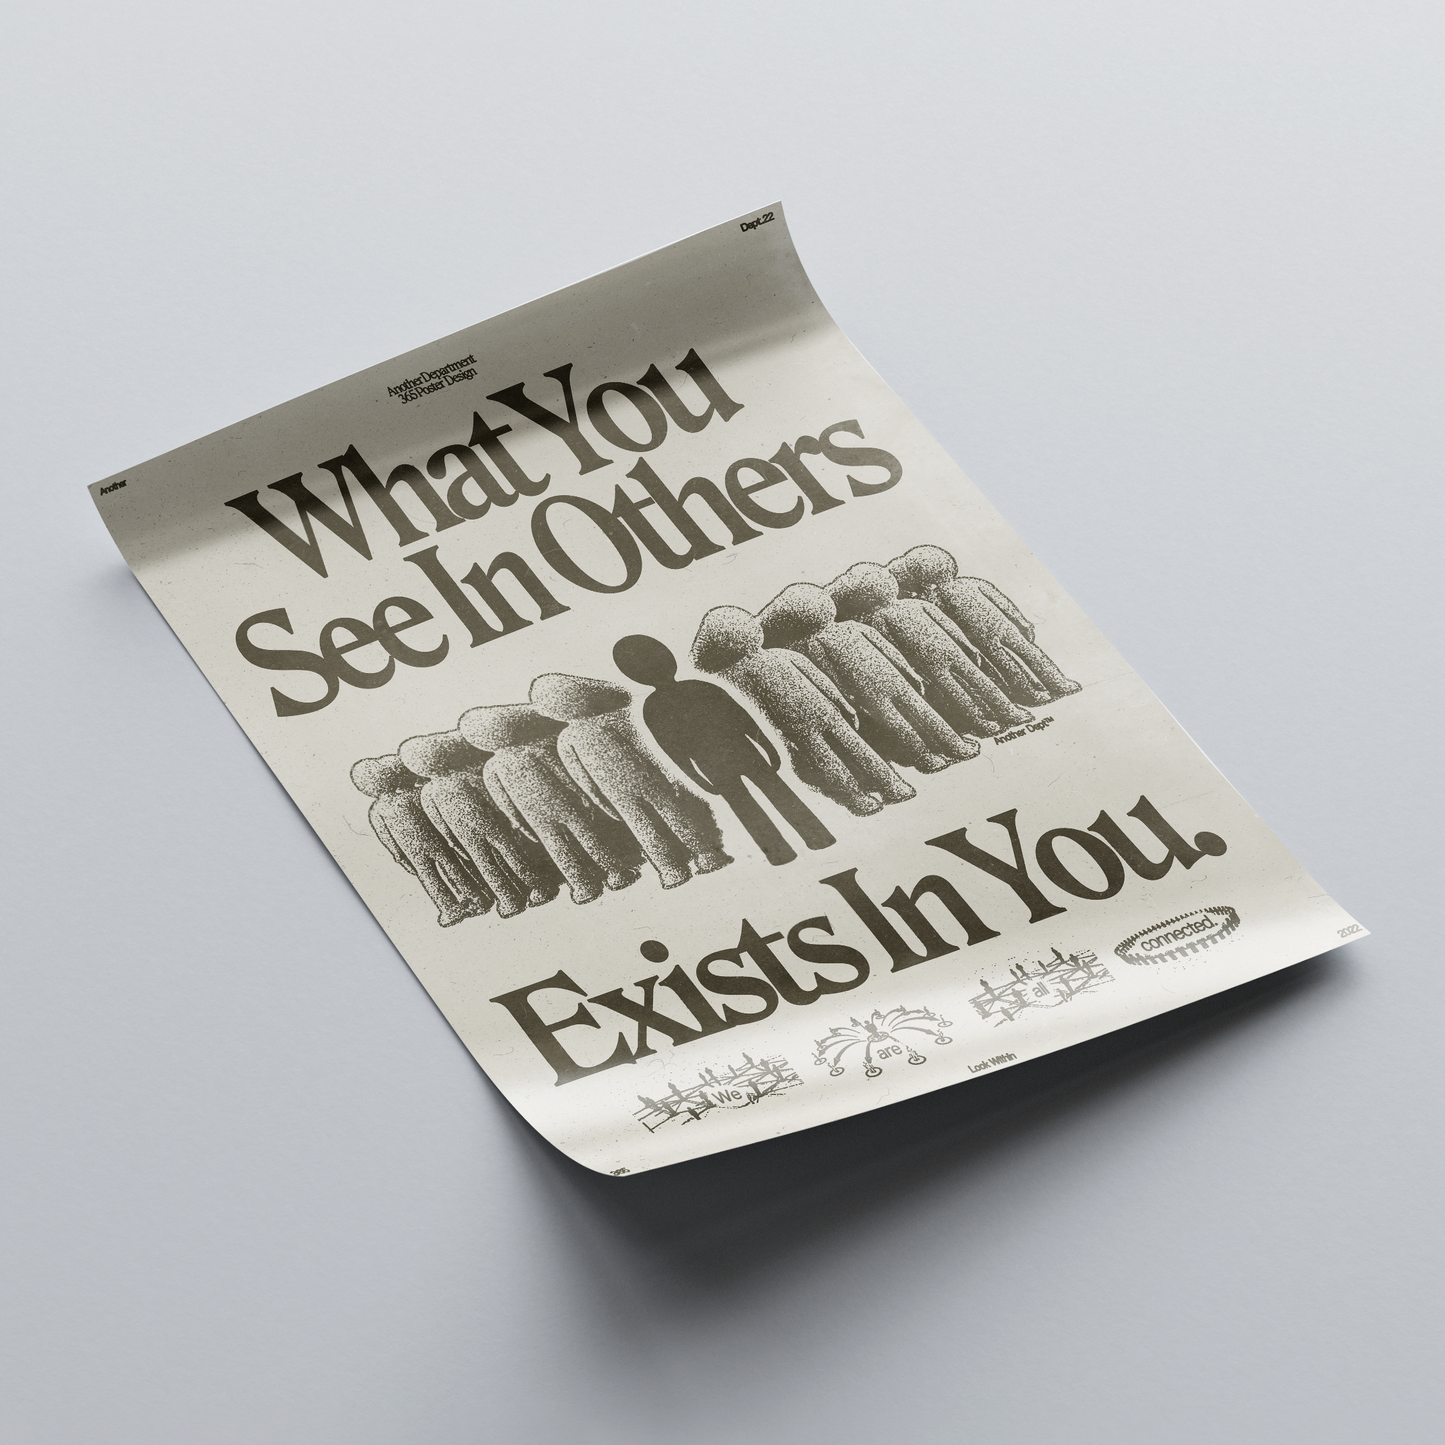 What You See in Others - Print